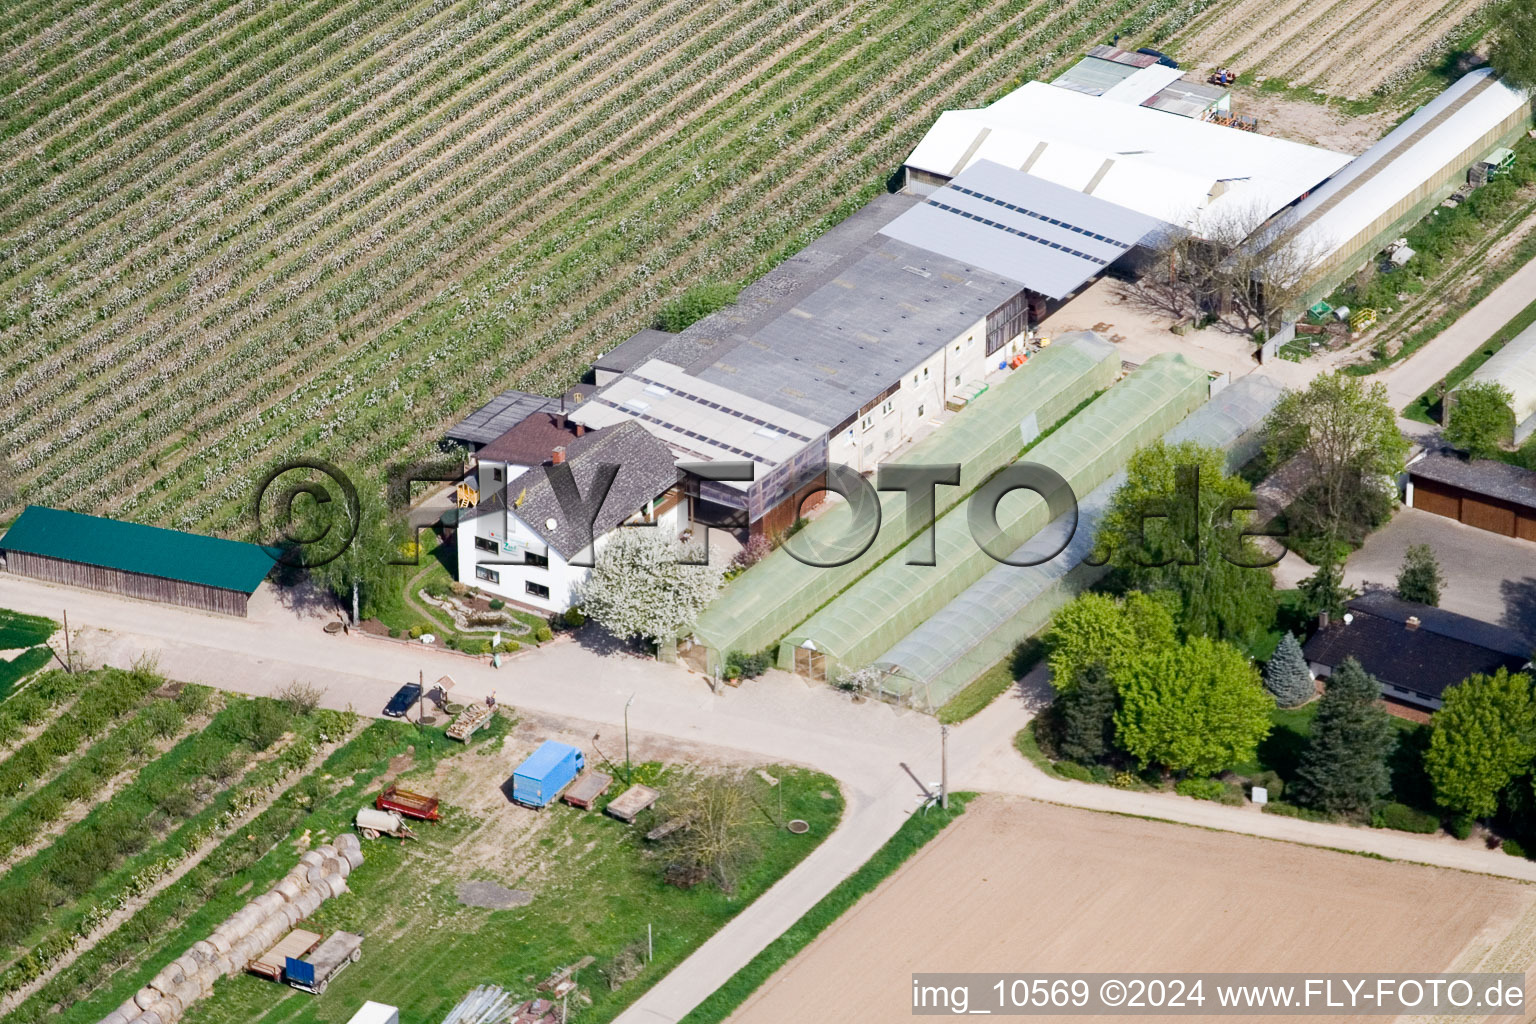 Homestead of a asparagus and fruit farm Zapf with farm market in Kandel in the state Rhineland-Palatinate